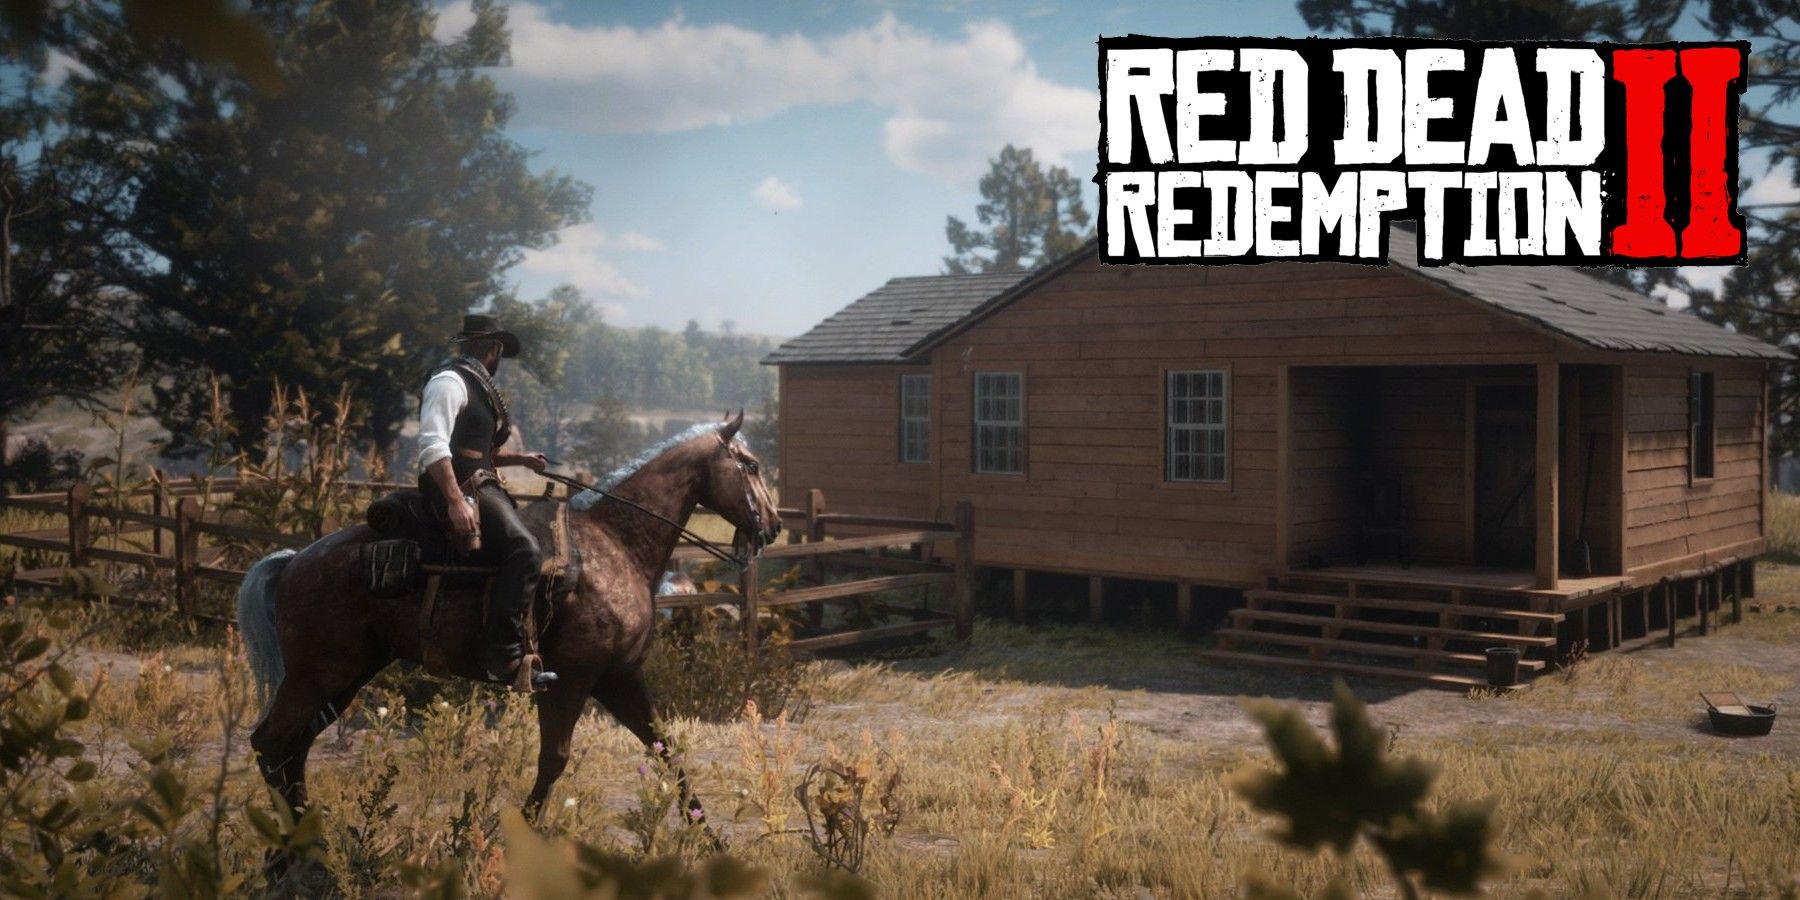 Unmissable Red Dead Redemption 2 Clip: Why You Can't Take Your